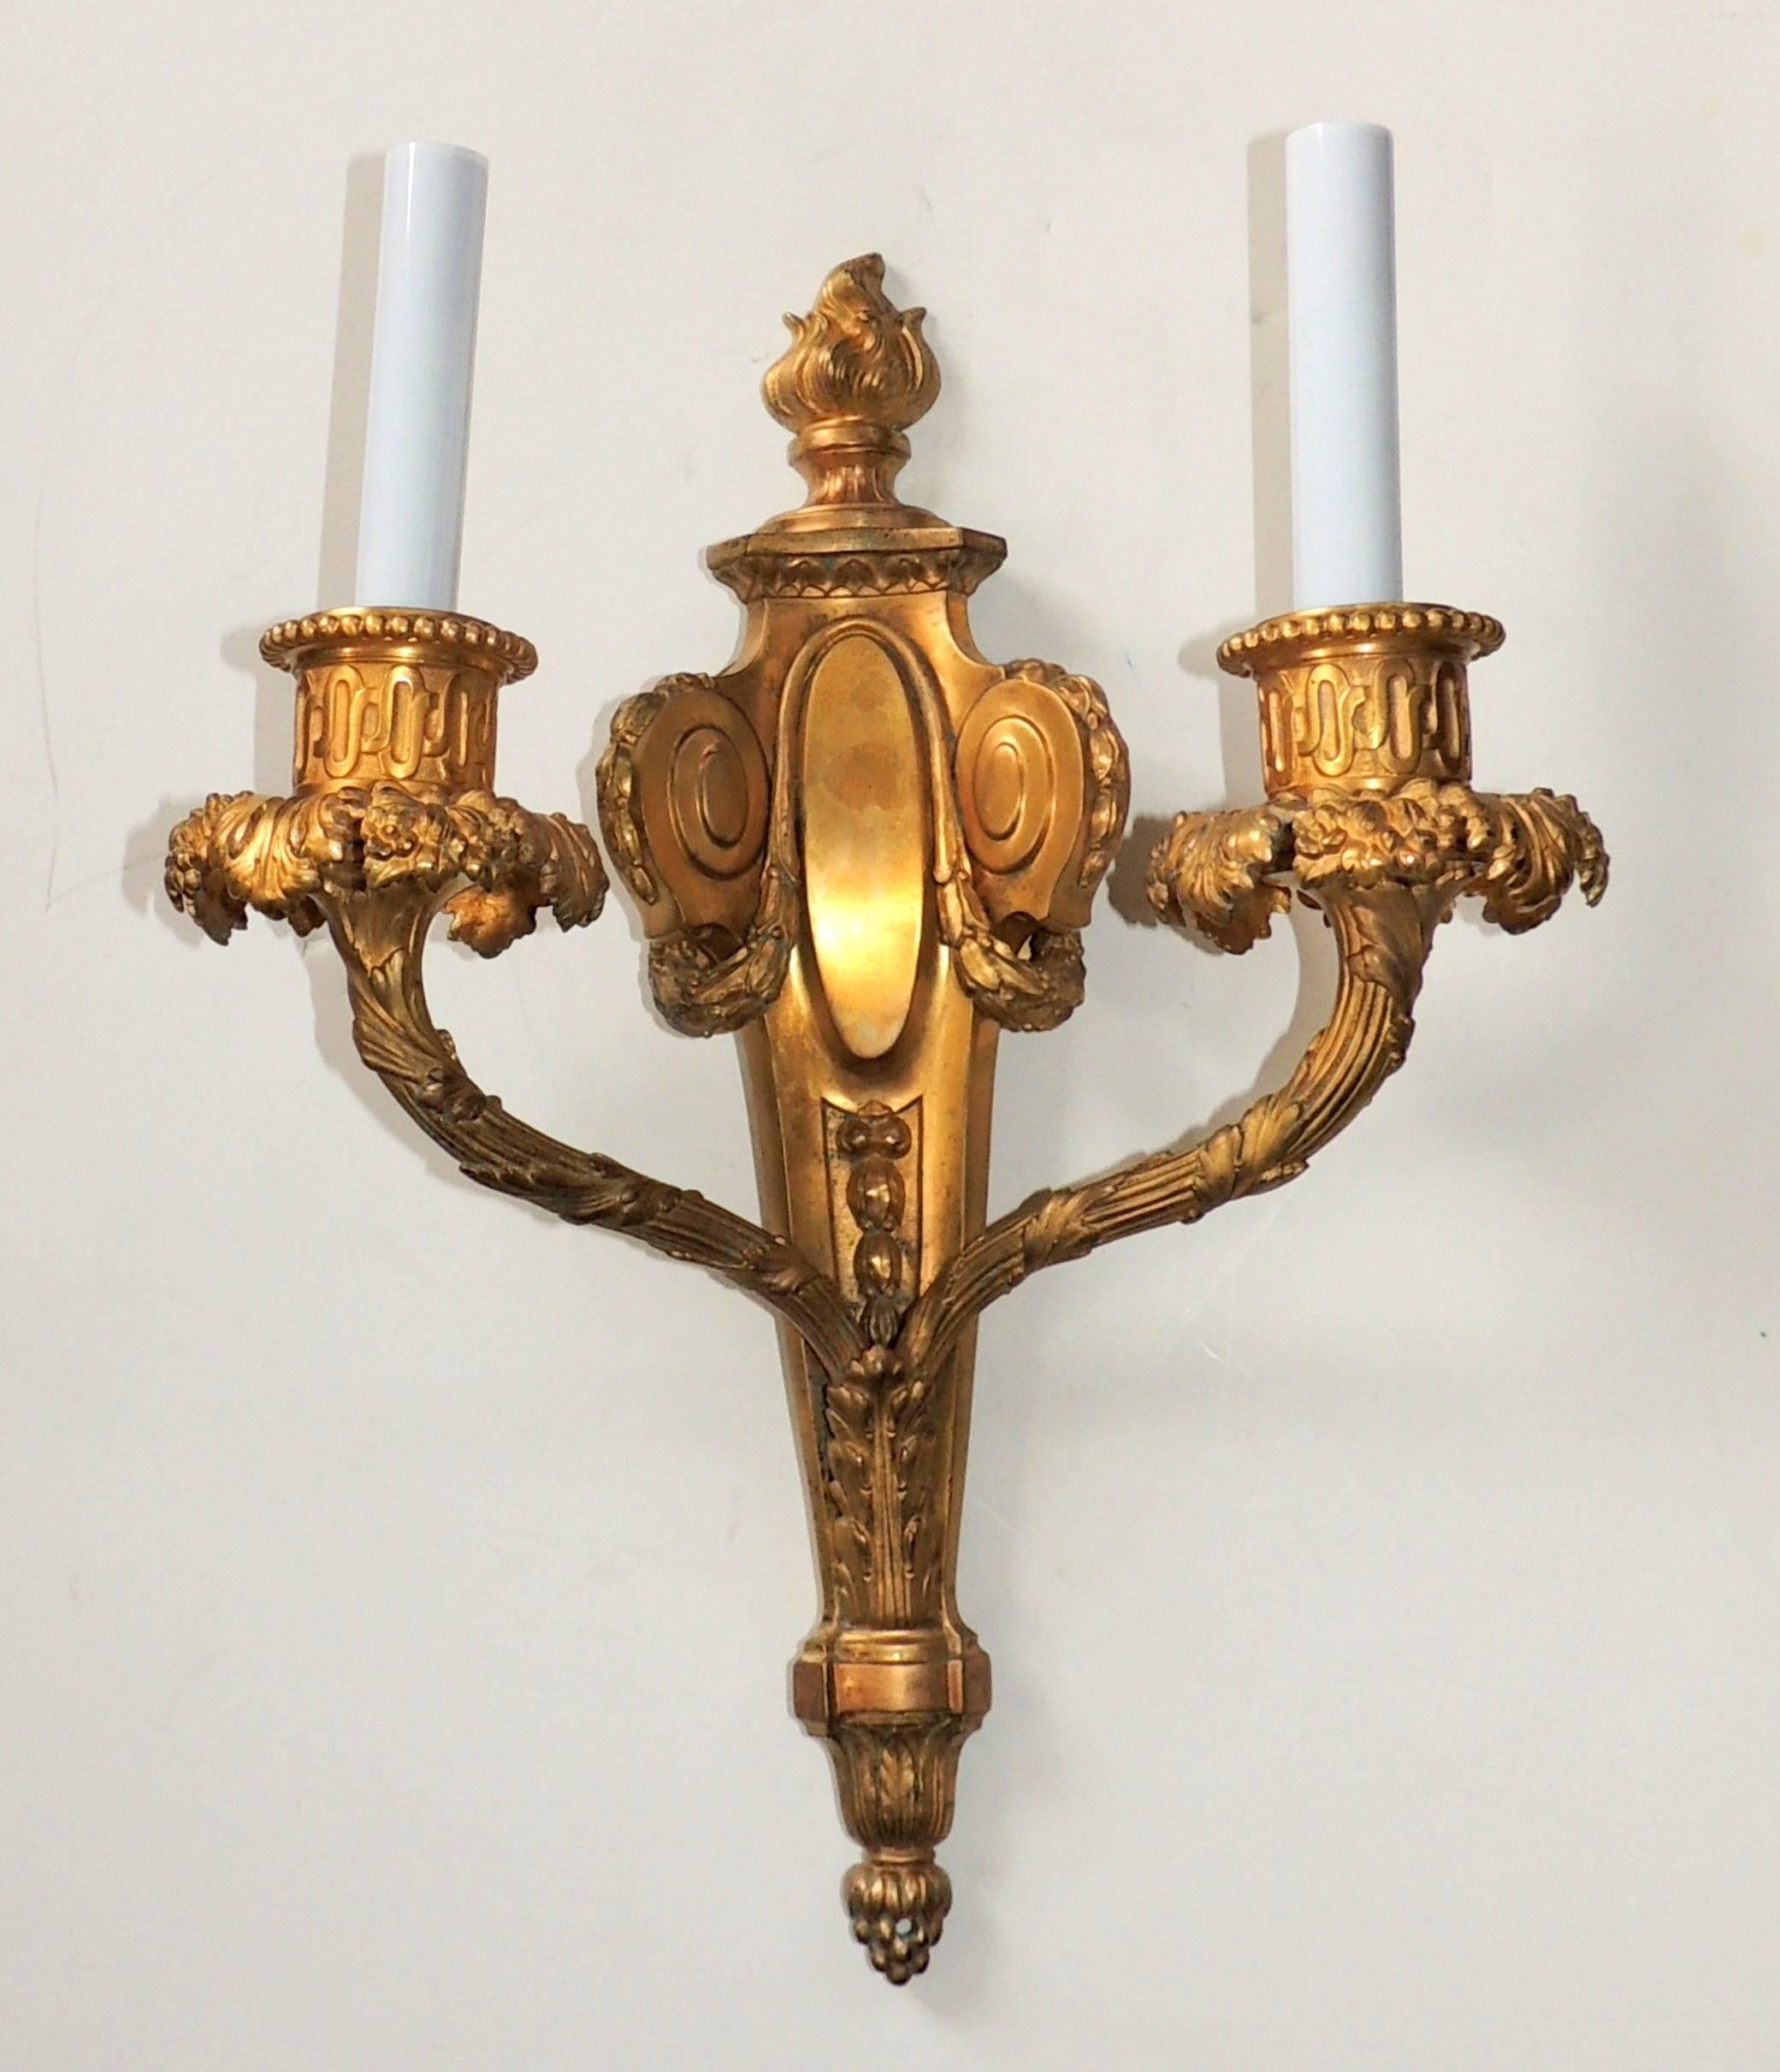 Exceptional pair of French doré bronze fine neoclassical flame top sconces.
Measures: 16